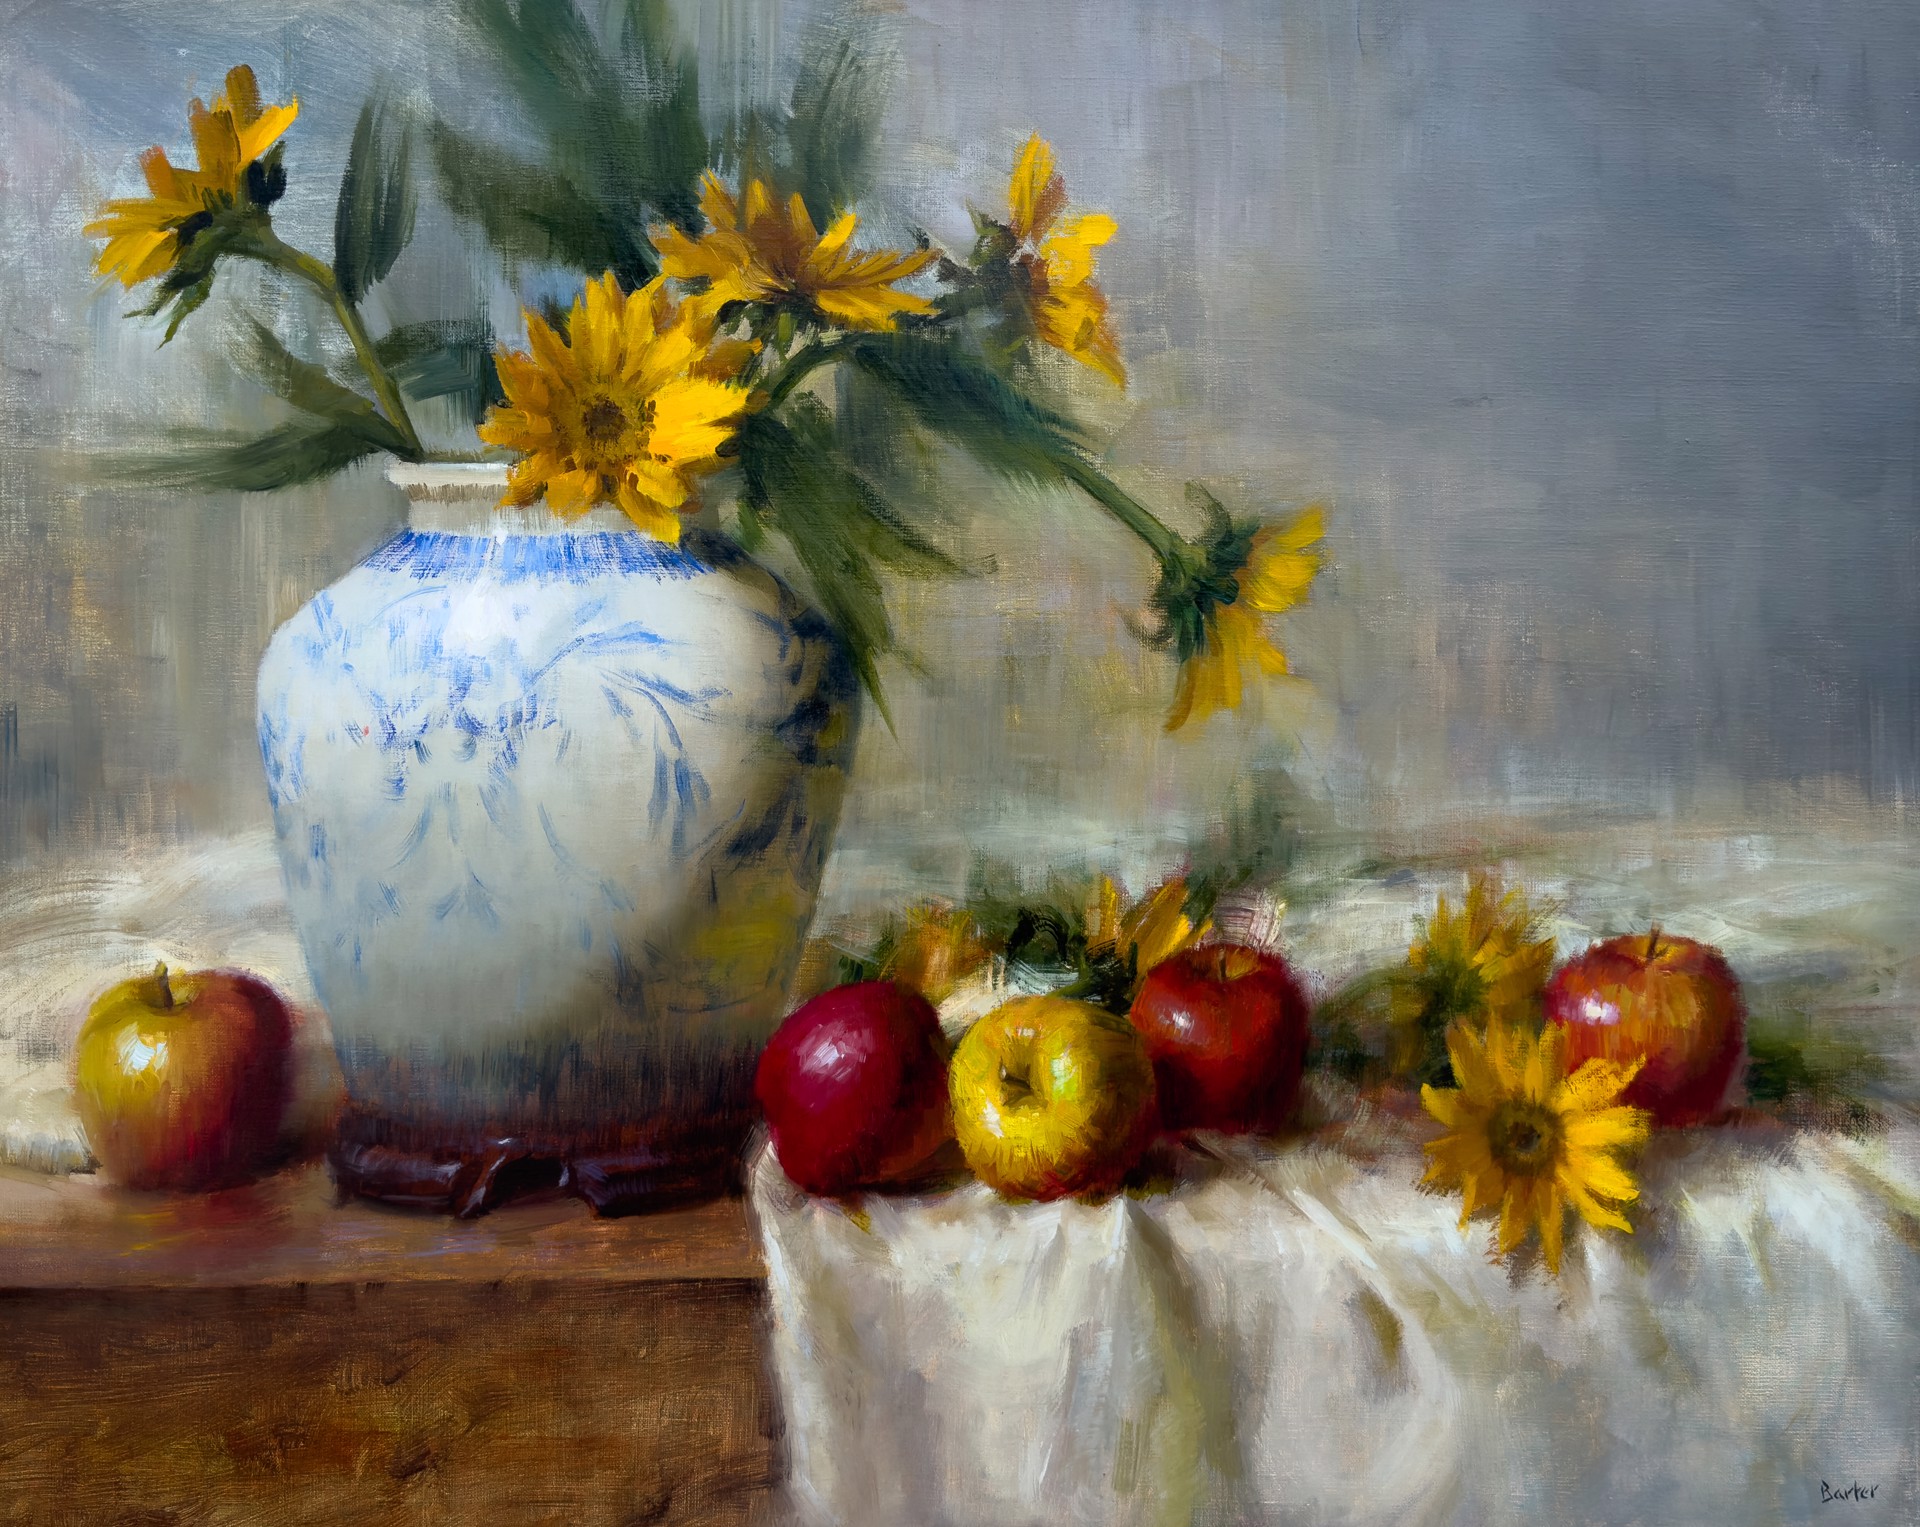 "Flow Blue wit Farm Apples and Sunflowers" by Stacy Barter